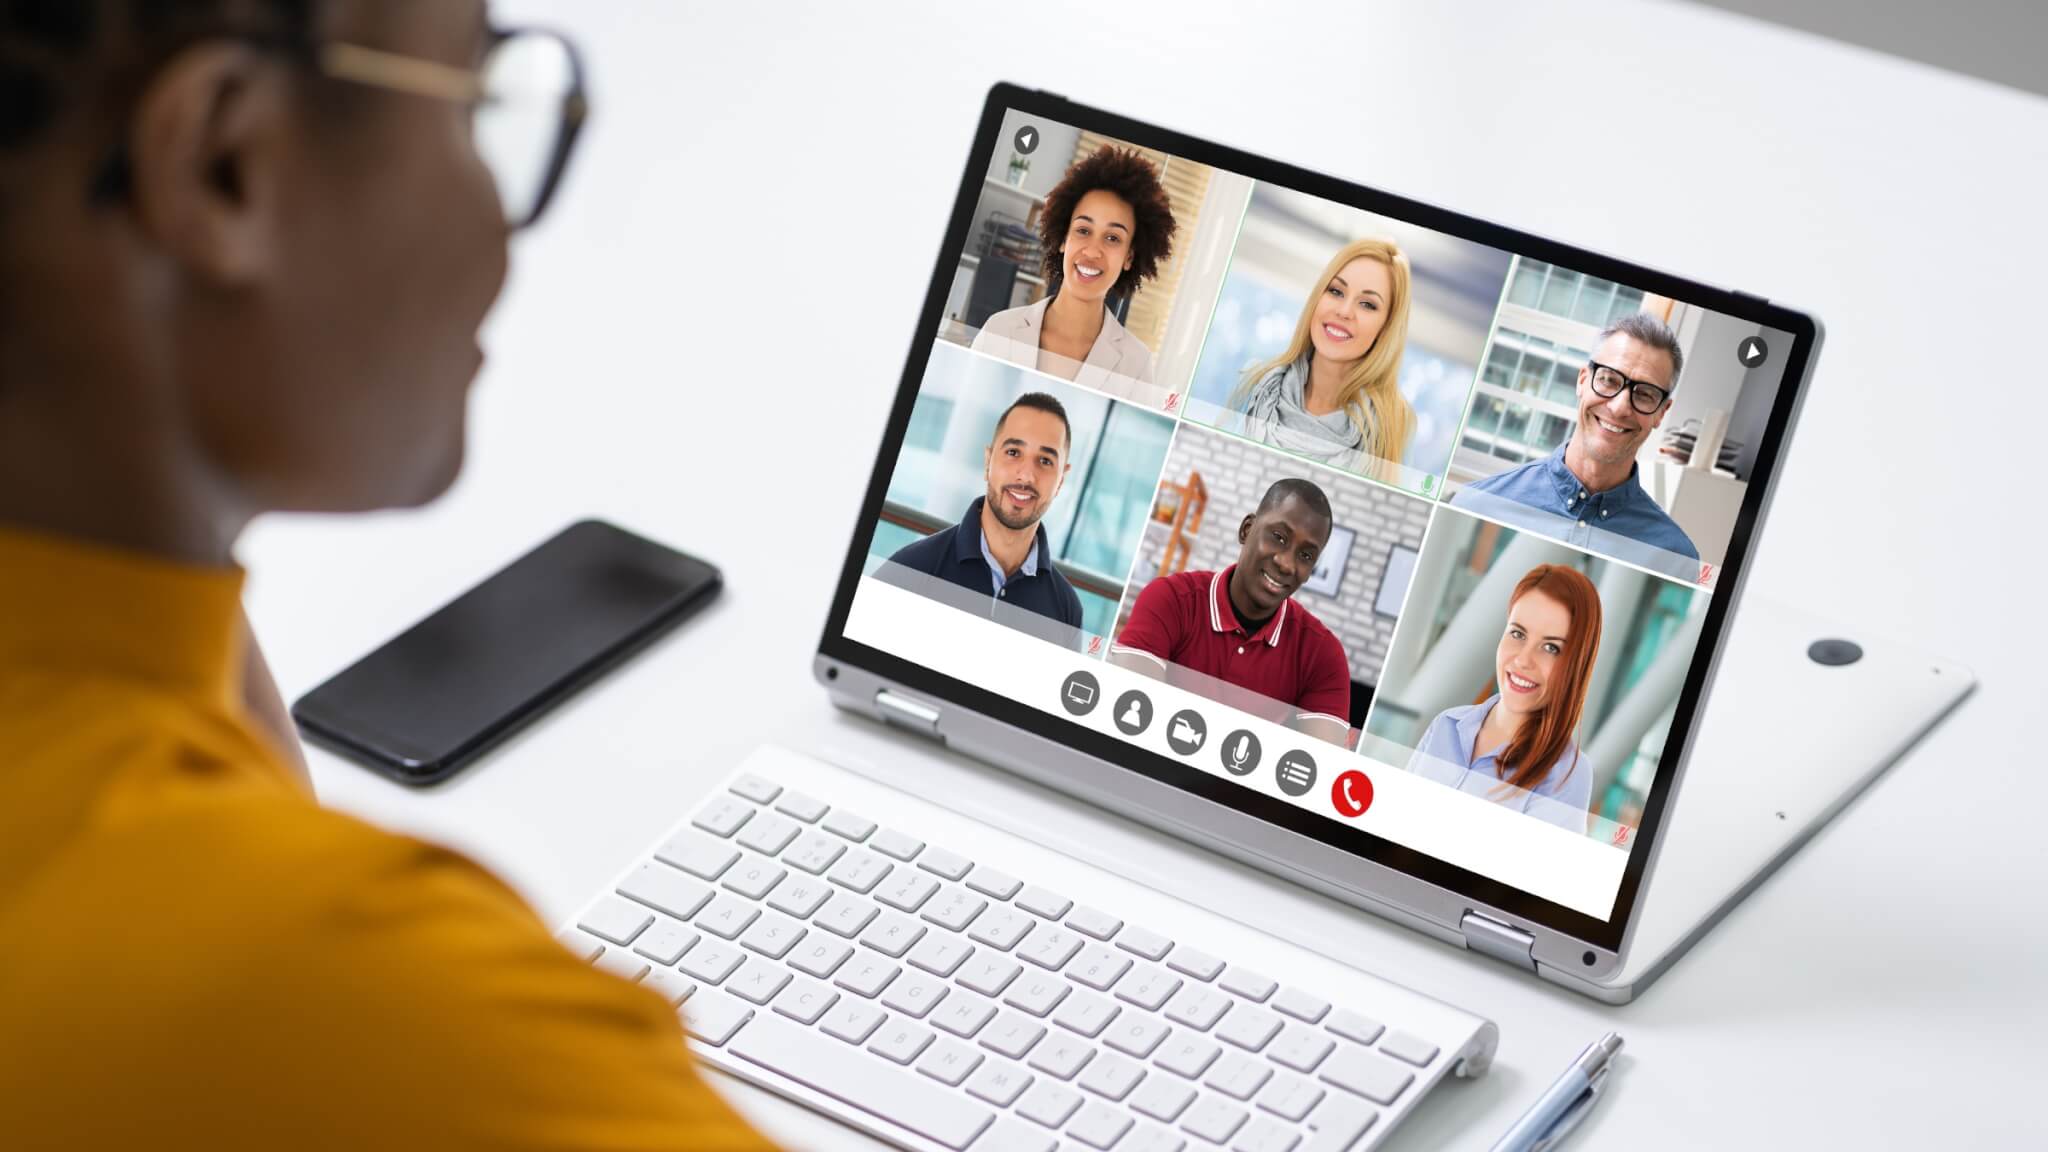 11 Tips for Presenting During Virtual Meetings